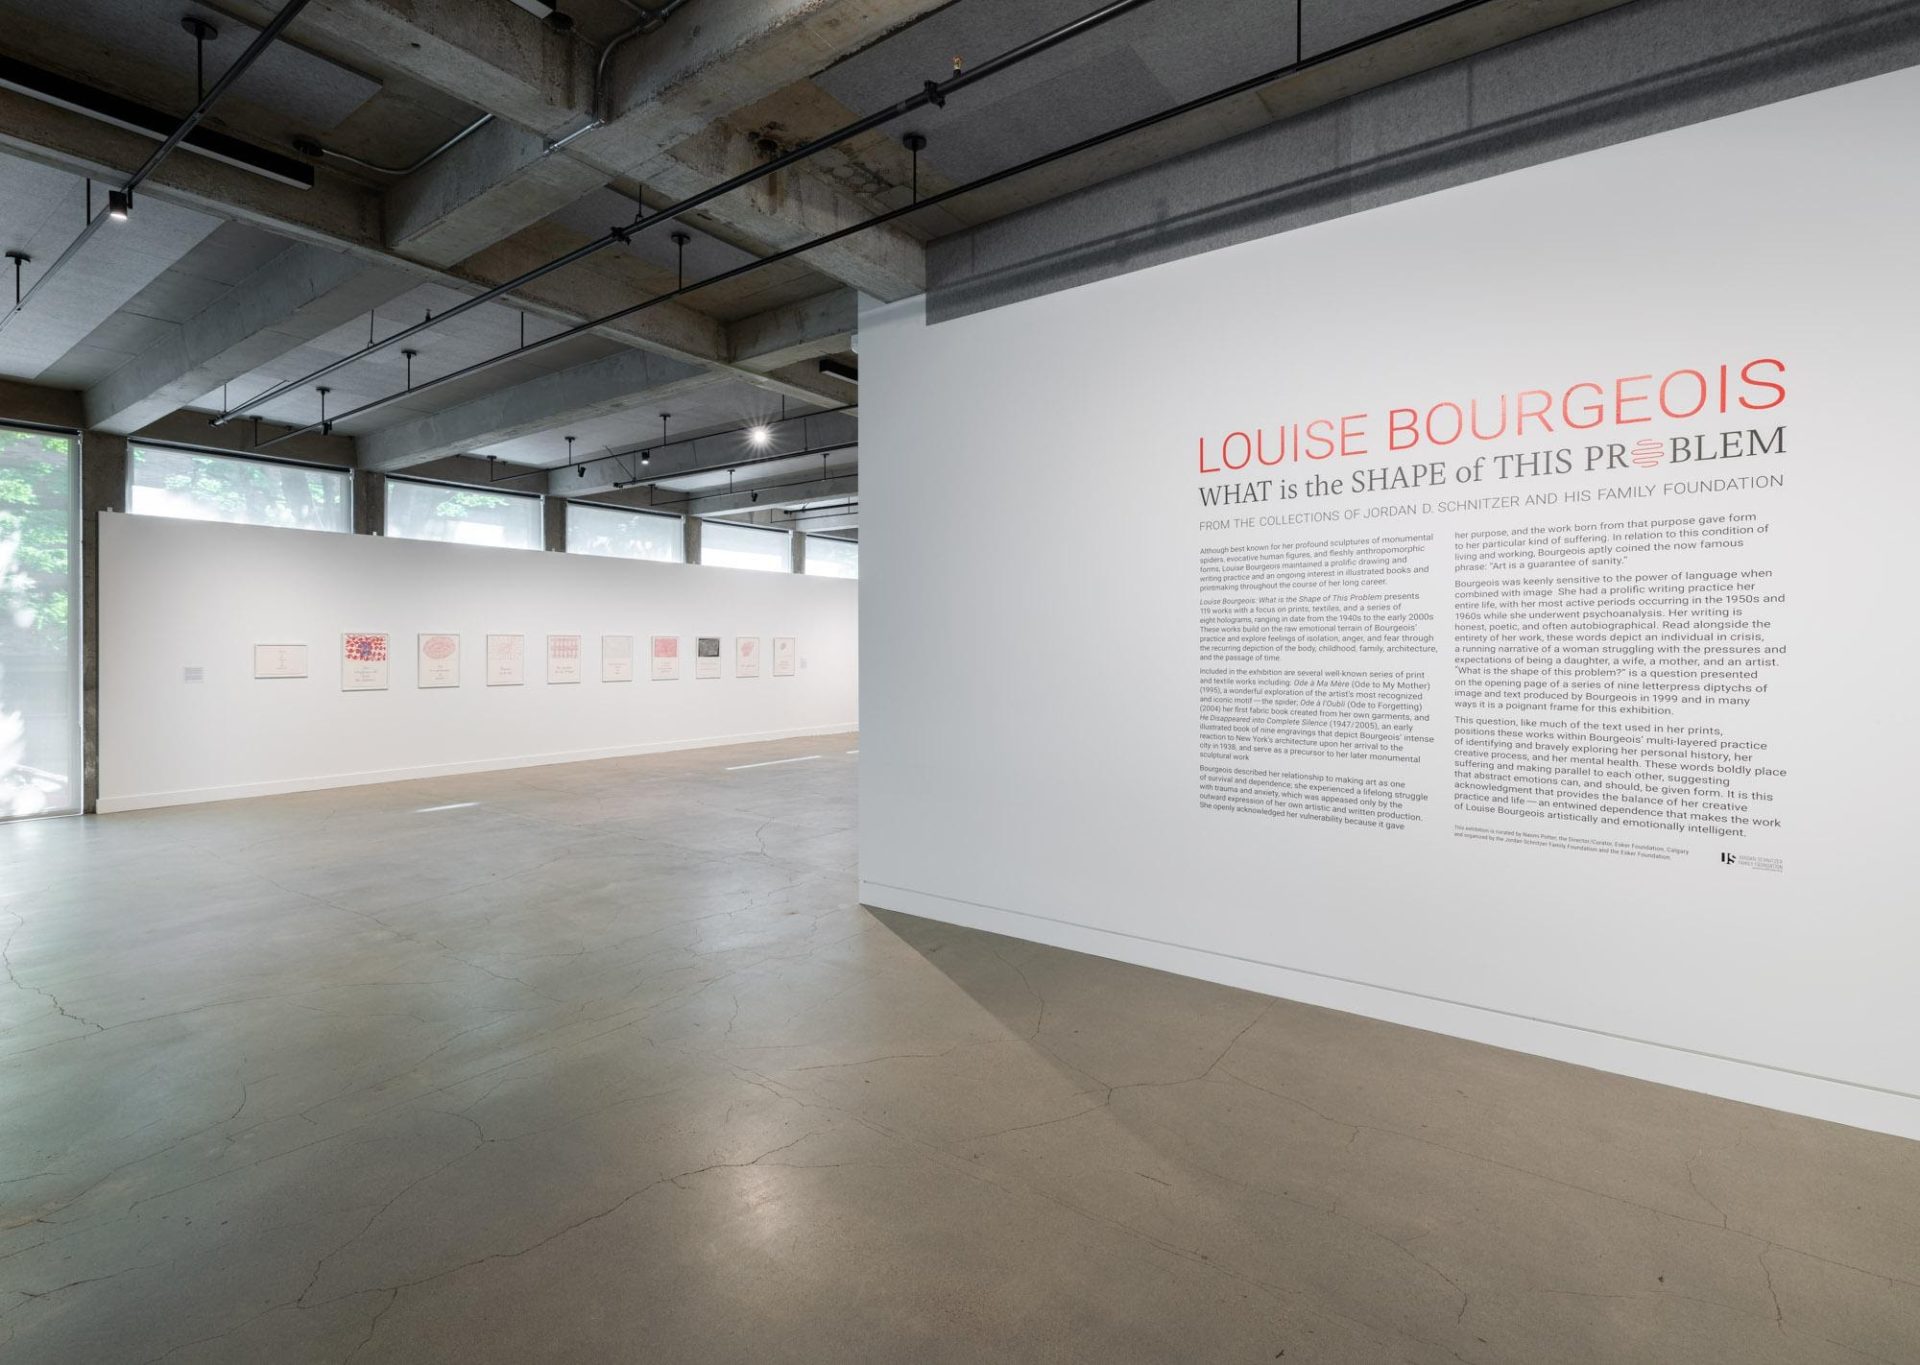 Installation View Louise Bourgeois: What is the Shape of This Problem, From the Collections of Jordan D. Schnitzer and His Family Foundation